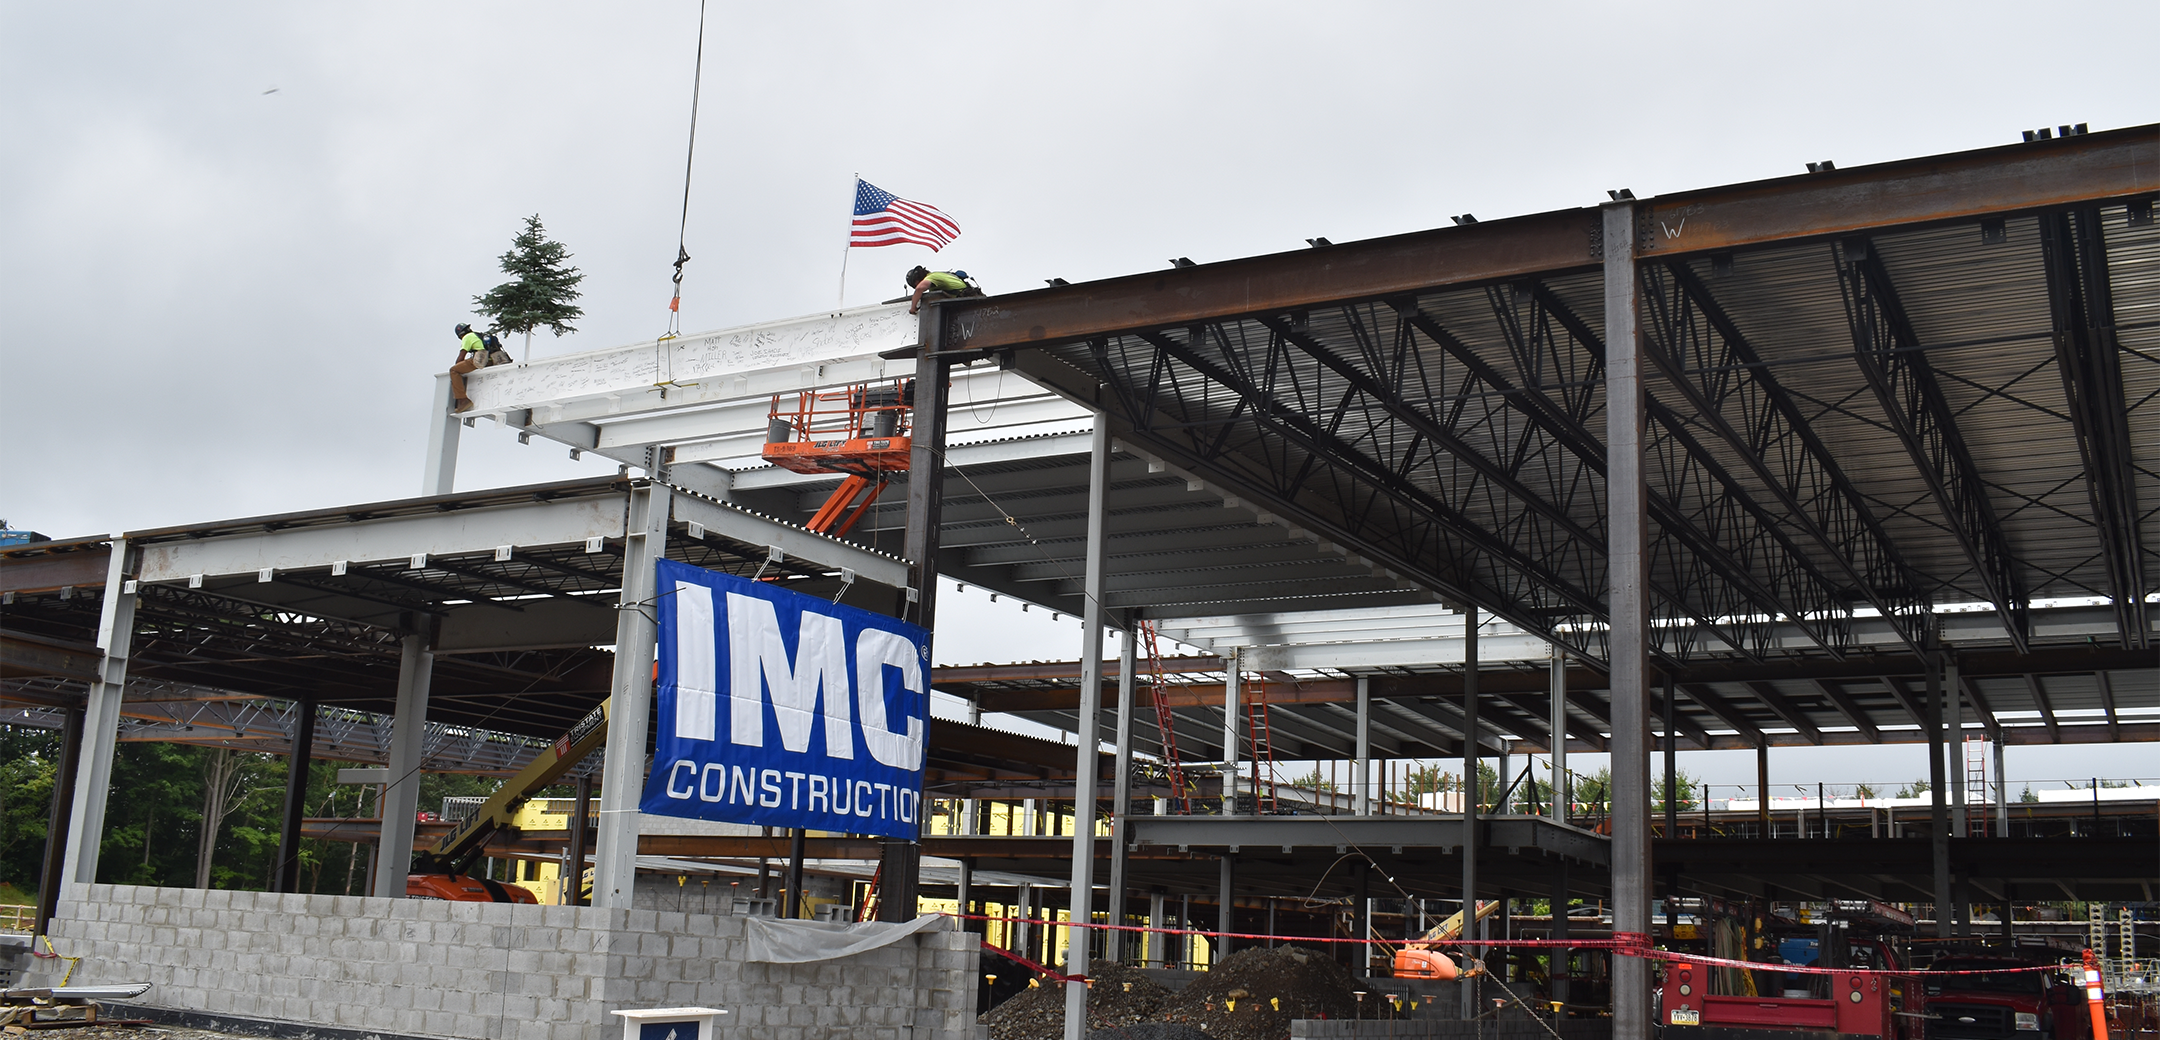 A close up photo of the Lower Merion Middle School building concrete frame featuring an IMC sign hanging on the side.